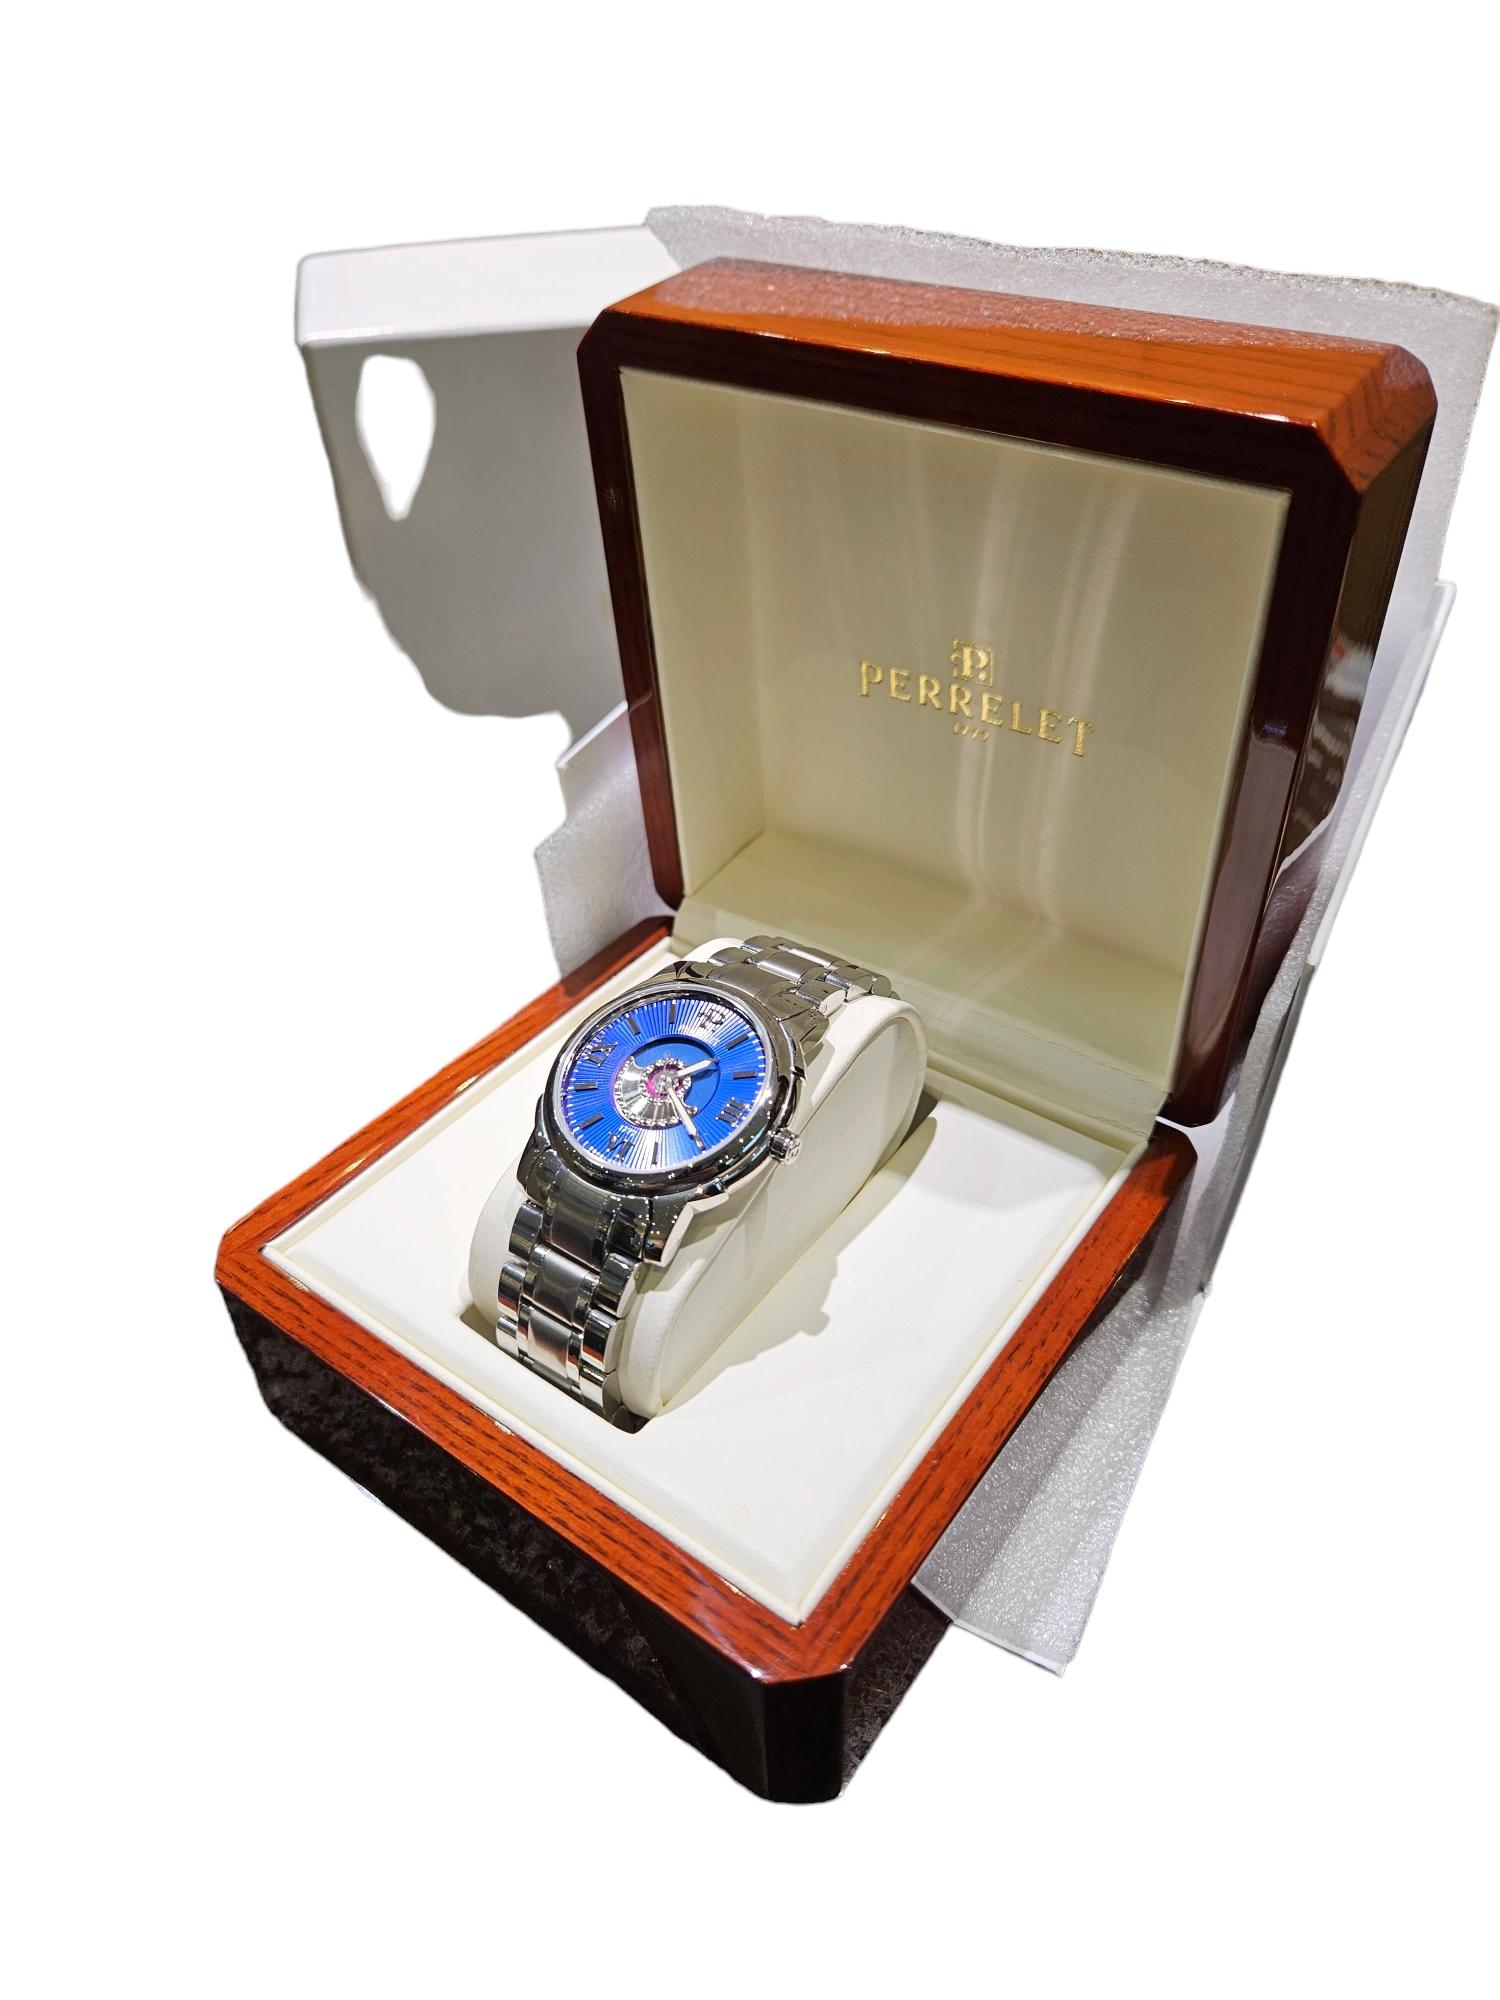 Perrelet Antartica James Cook Limited Edition Wrist Watch For Sale 11